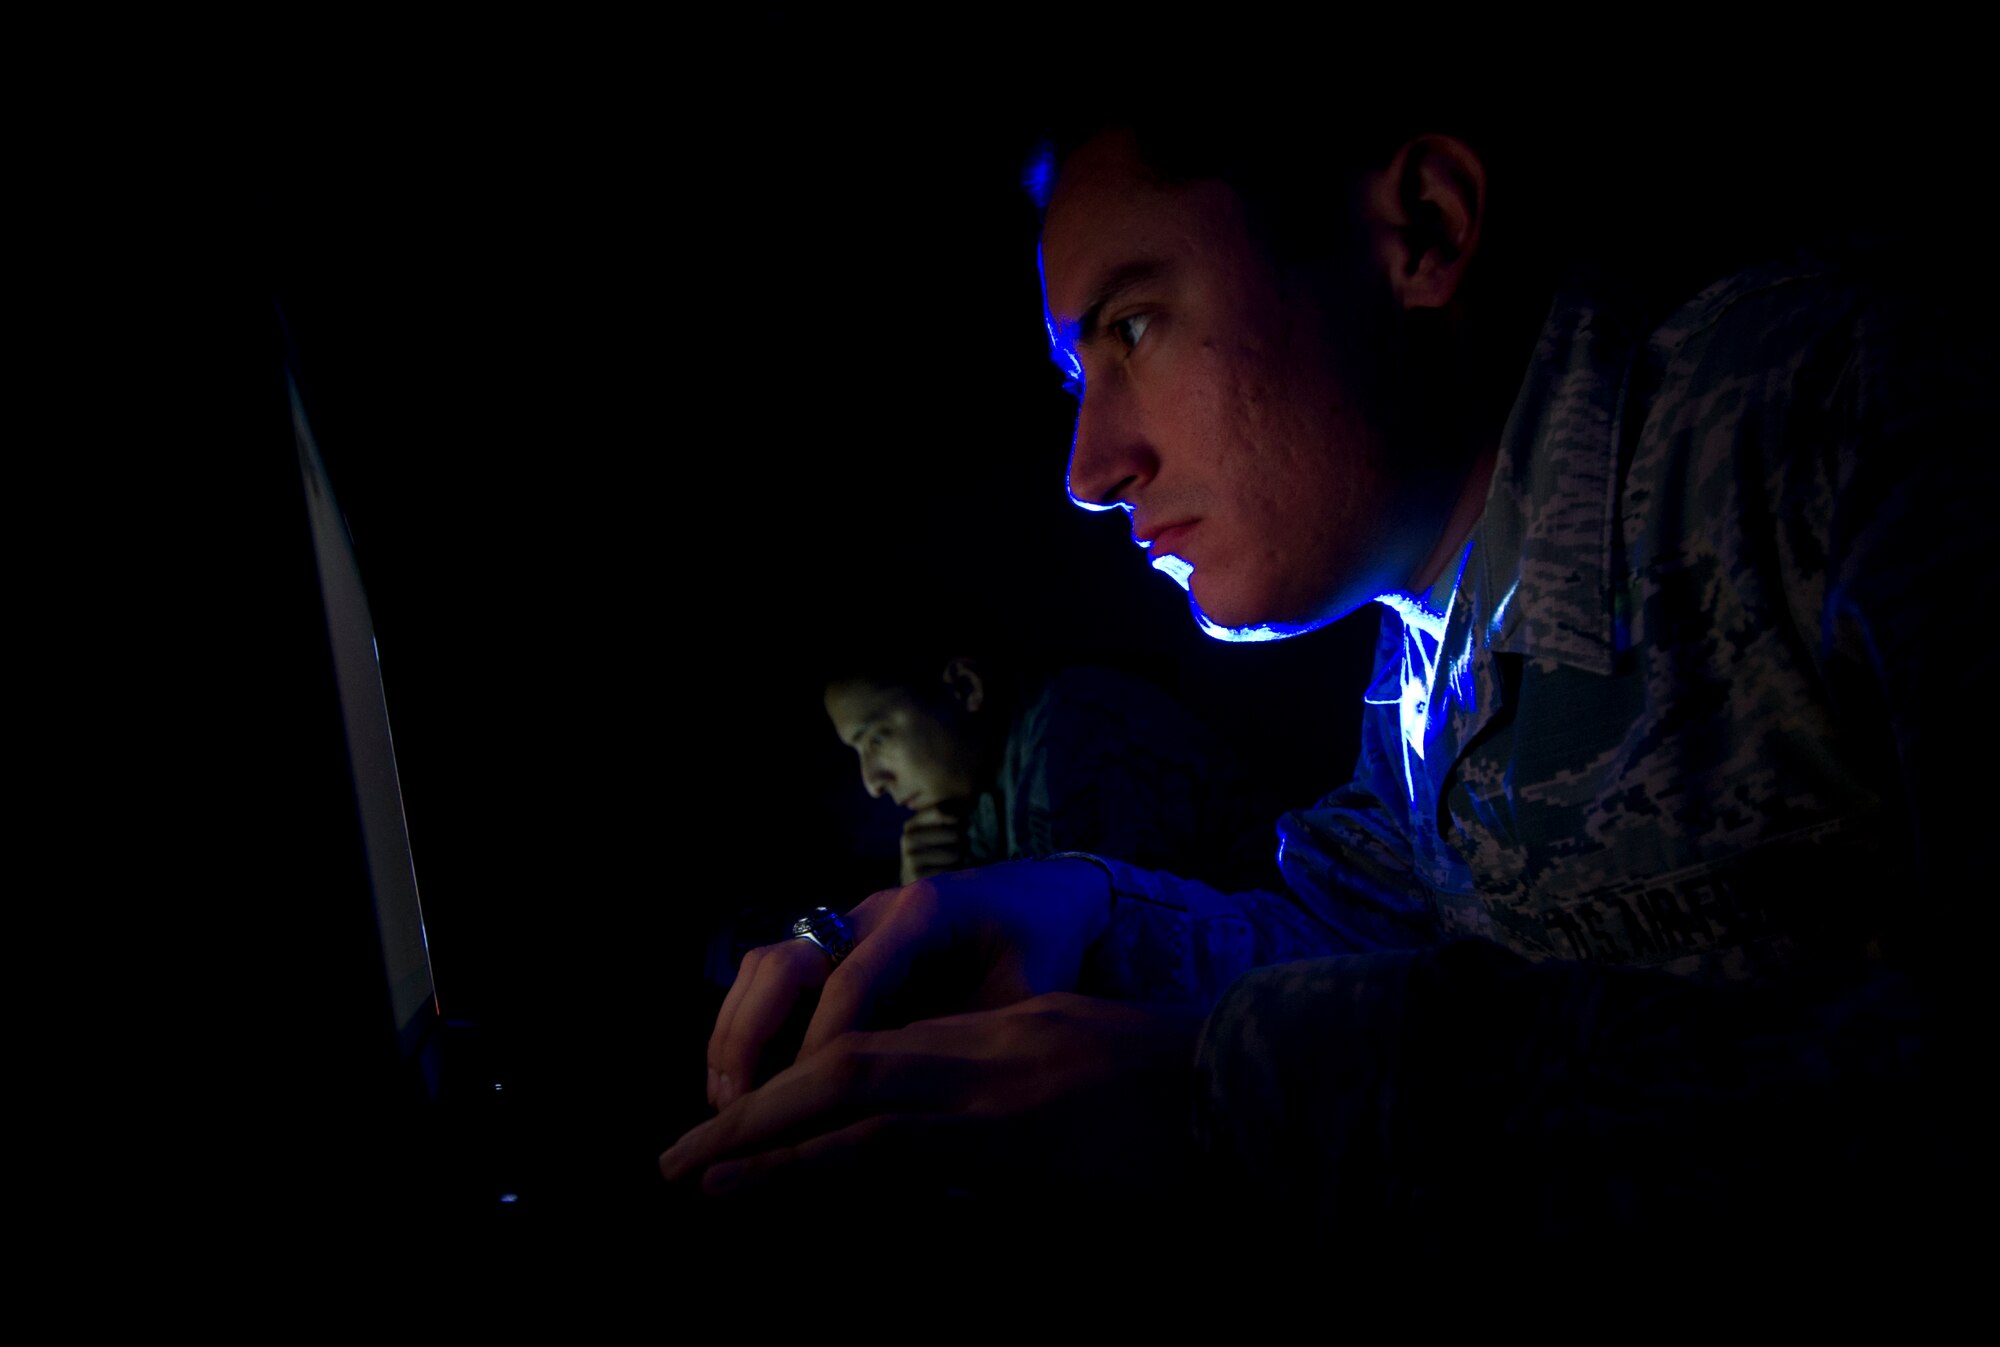 A photo illustration of the Cyber Squadron Initiative program Oct. 28, 2016. The Cyber Squadron Initiative is a pathfinder for innovation within the Air Force cyber domain that combines Airmen from different Air Force Specialty Codes to enhance cyber surety on Air Force installations. The 325th Communication is one of 16 squadrons designated for the Cyber Squadron Initiative Air Force-wide, and the first selected for Air Combat Command. (U.S. Air Force photo illustration by Senior Airman Solomon Cook/Released)